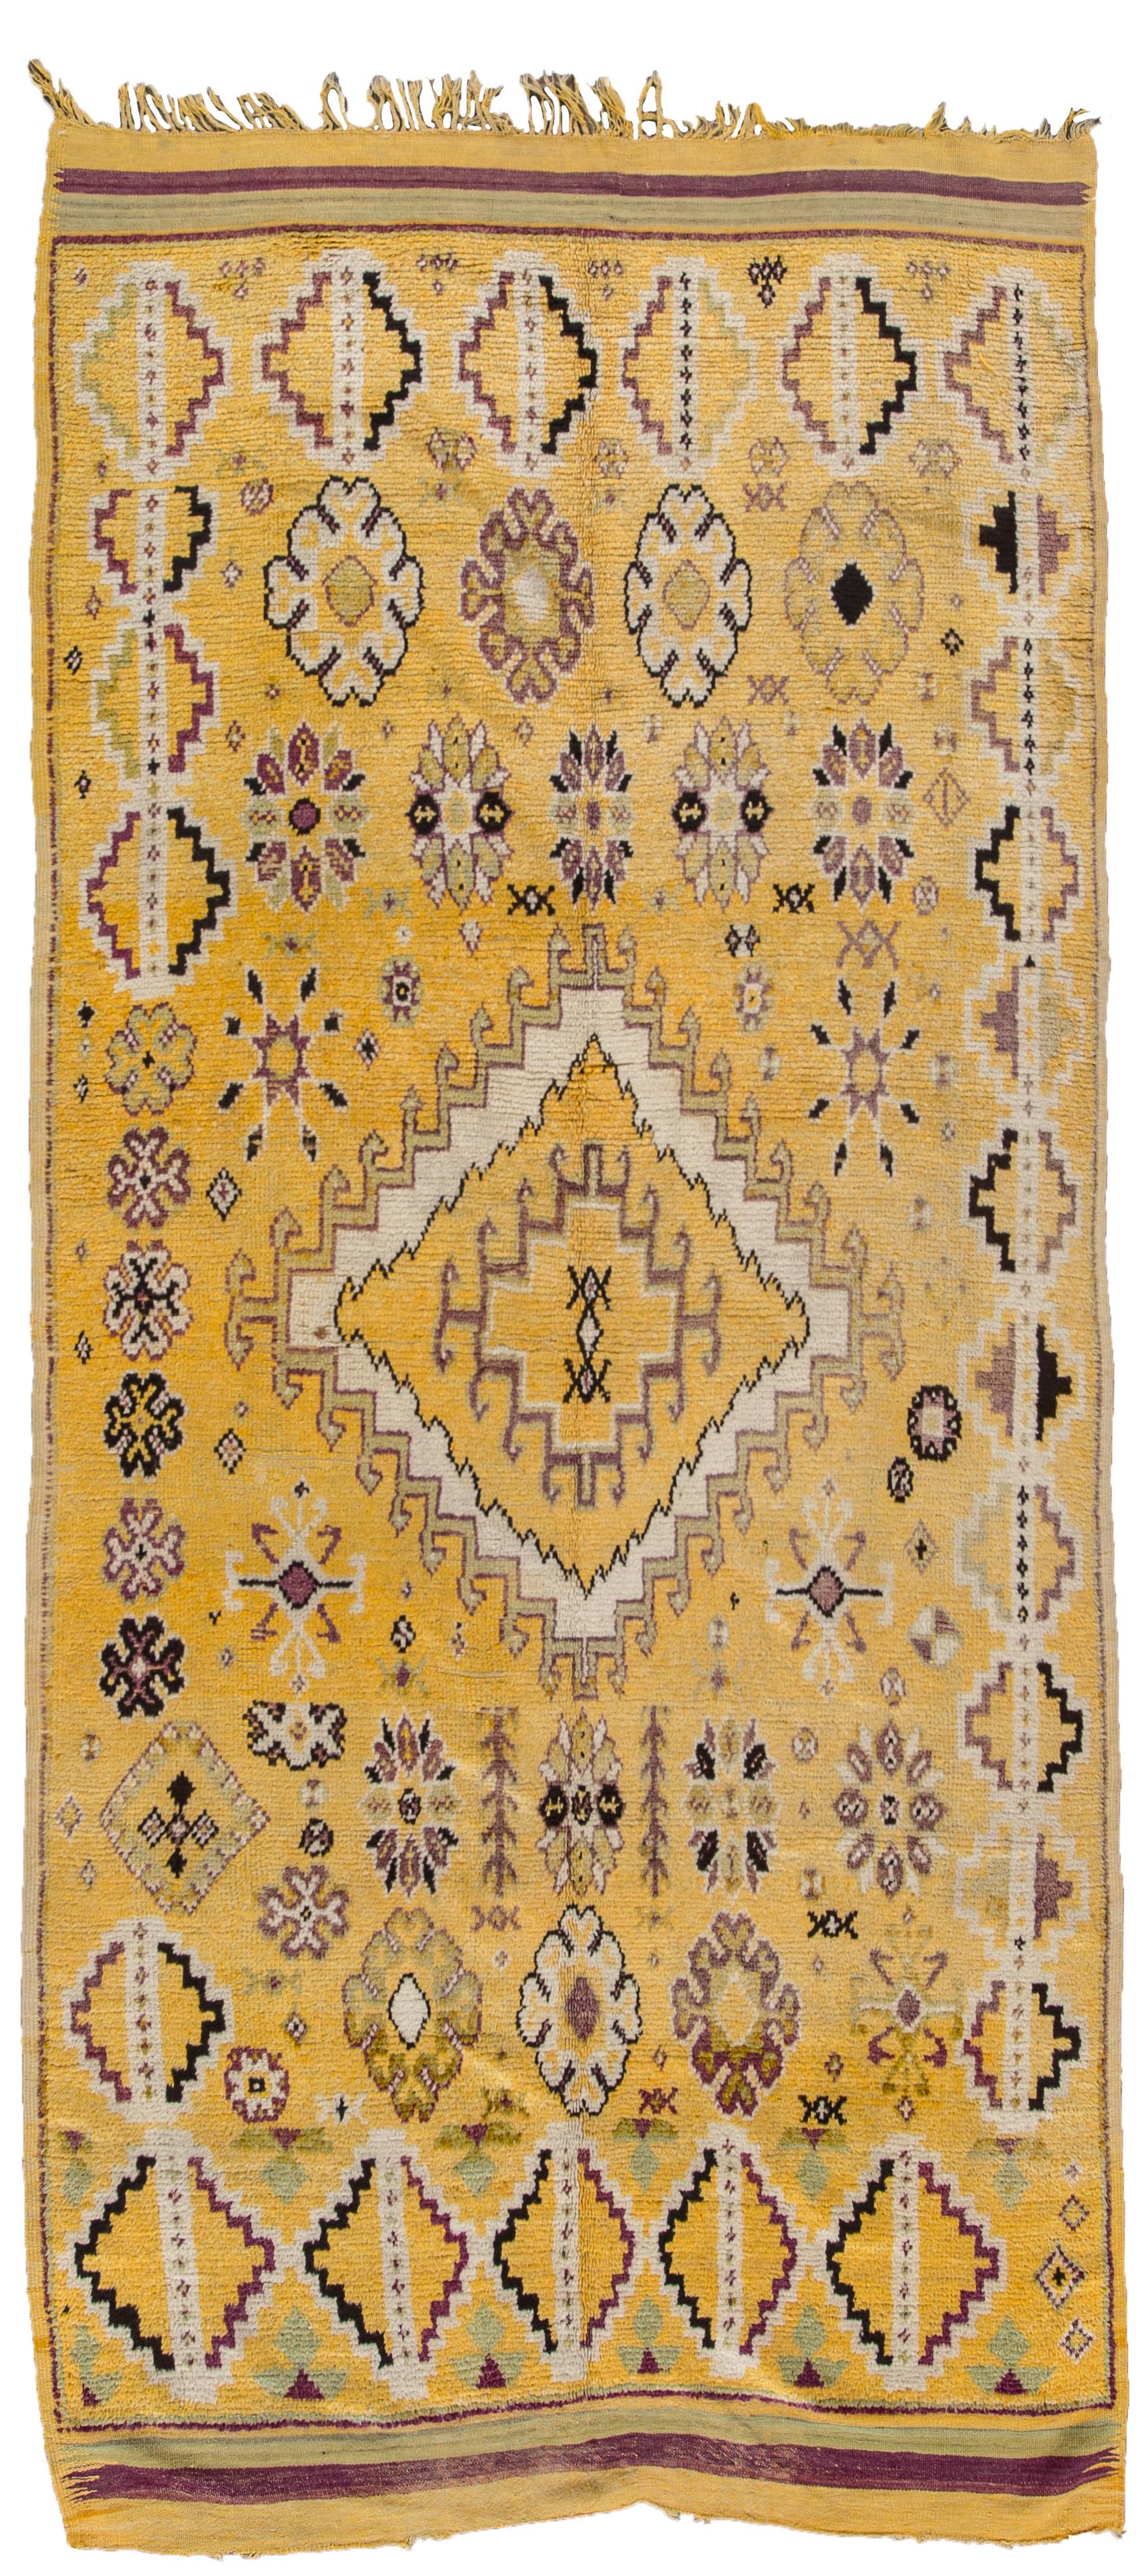 Beautiful Vintage Moroccan Wool rug with a yellow field. Accents of purple, ivory, and green in an all-over geometric design.
 
This rug measures: 5' x 12'
